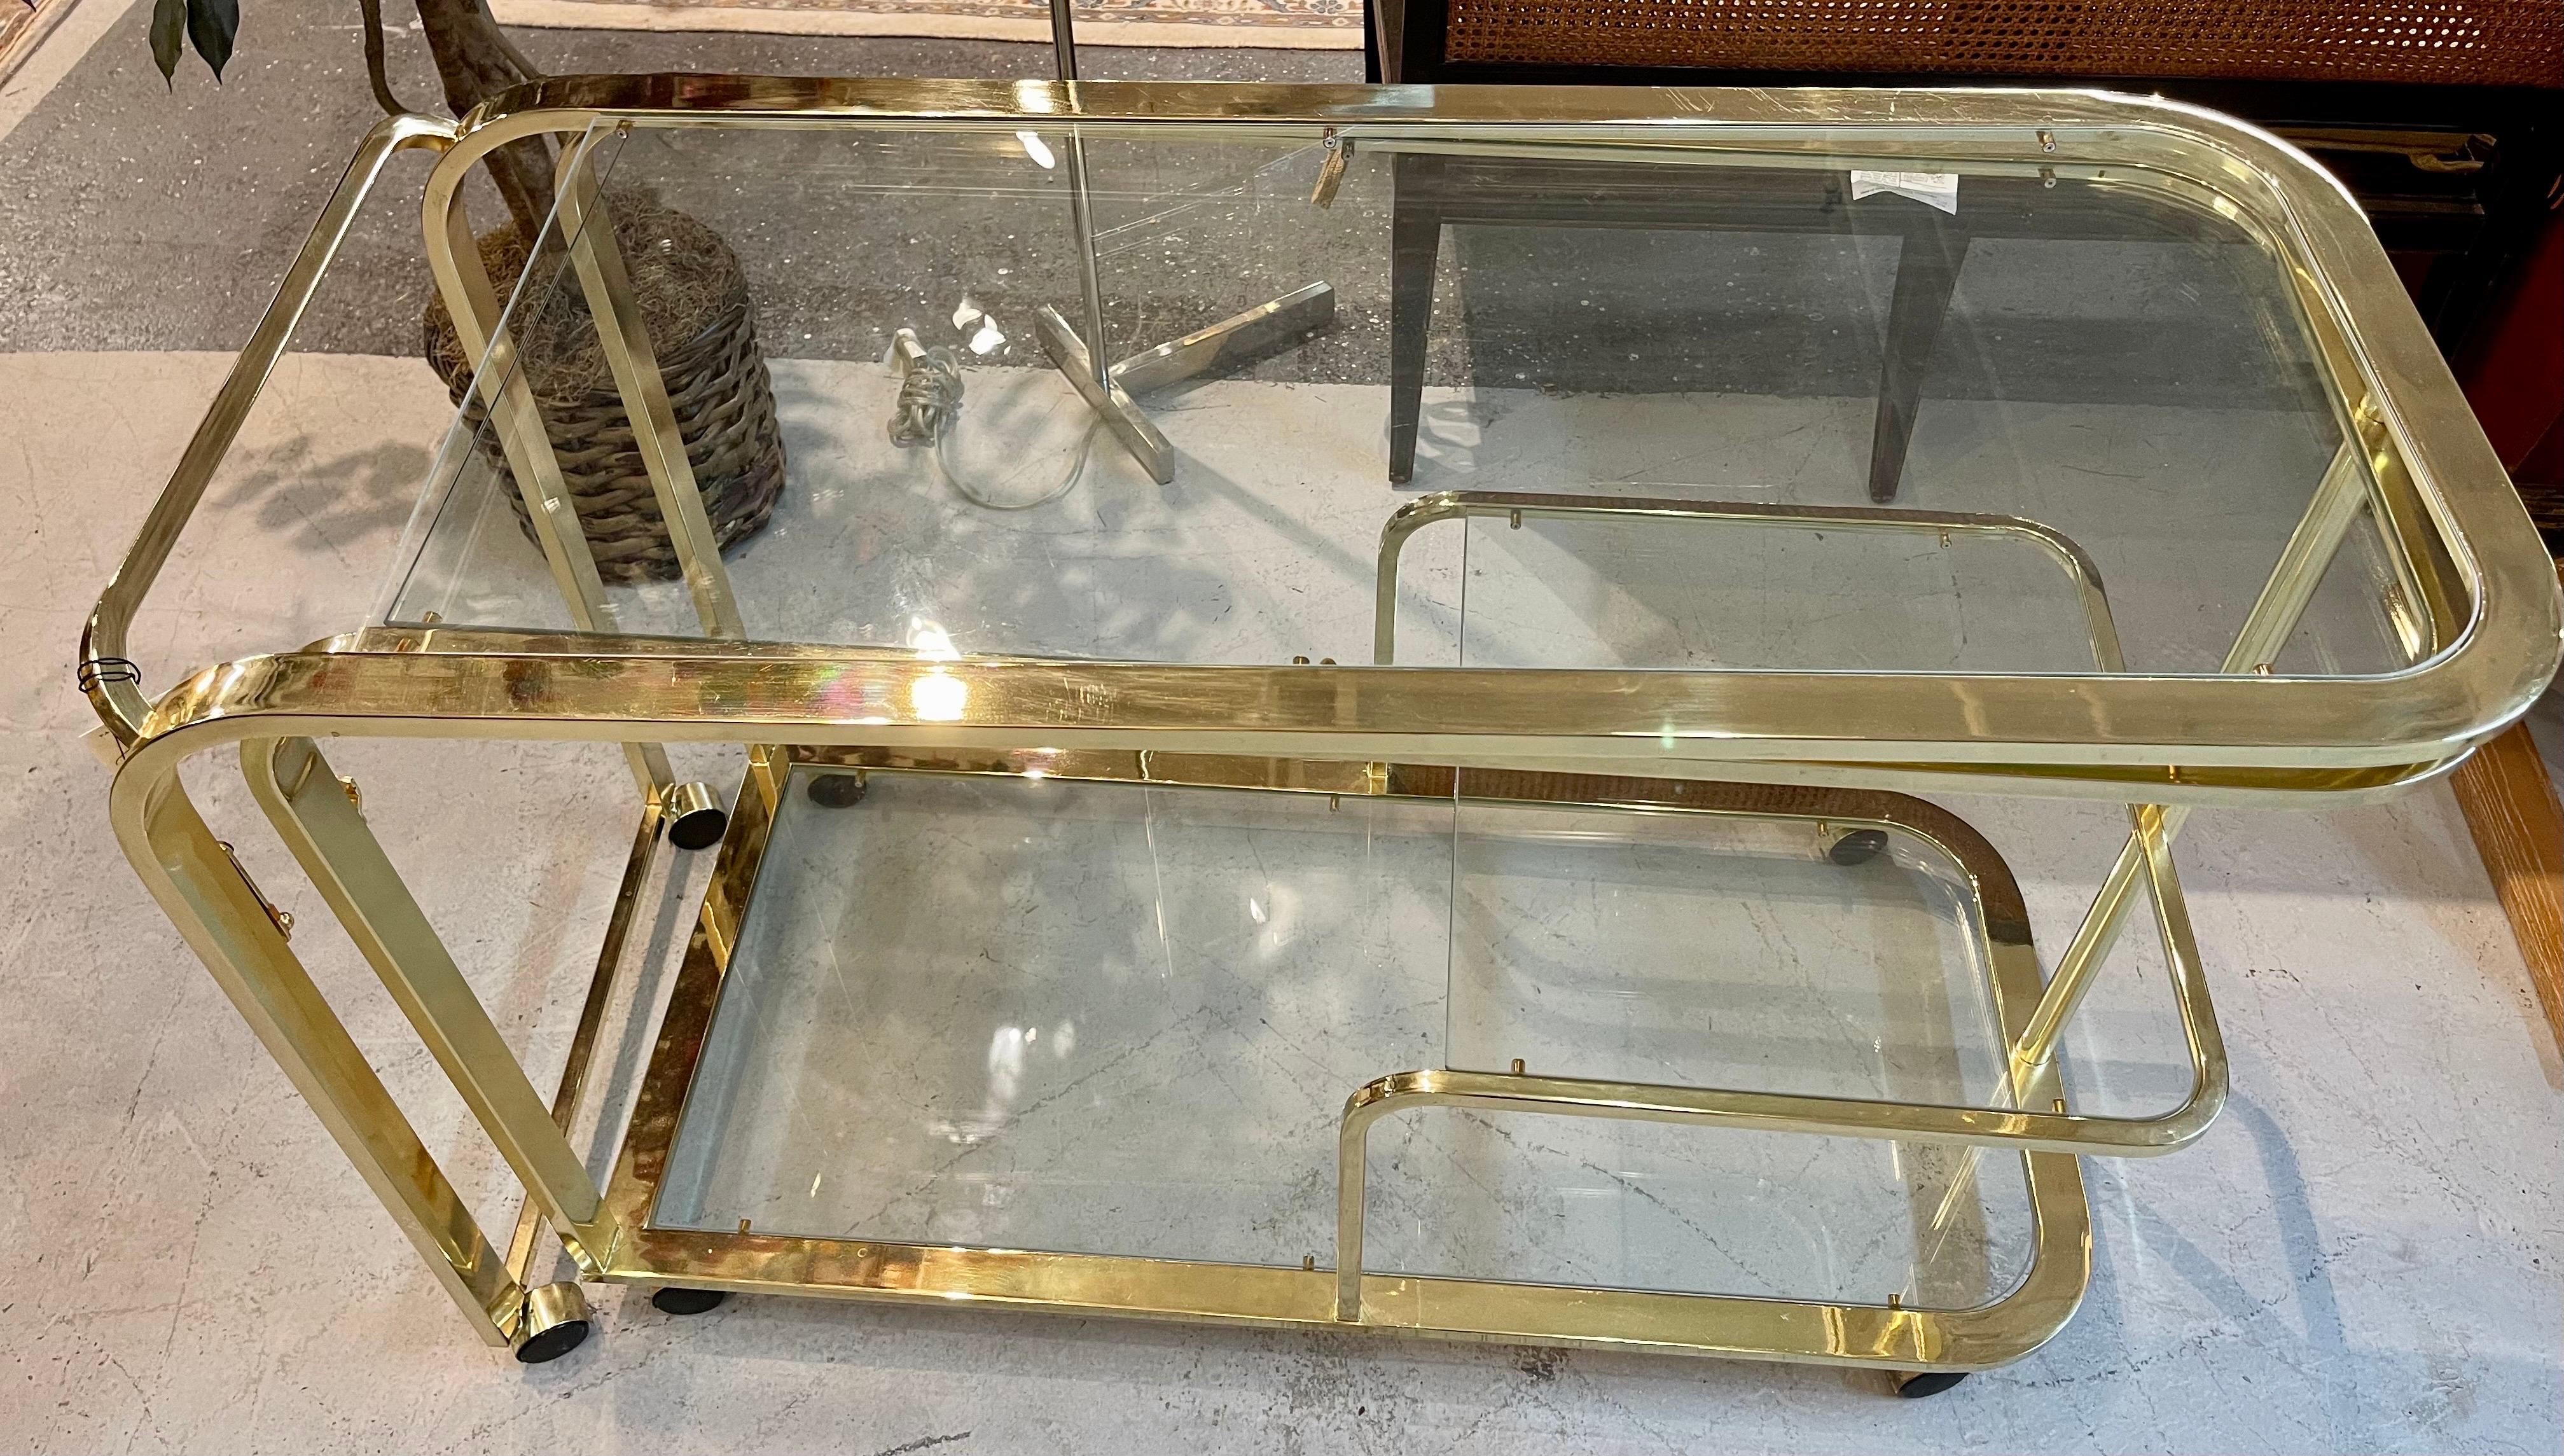 Gorgeous Design Institute of America (DIA) expandable chrome, brass and glass rolling bar cart. Features ease of movement with caster wheels and new glass.
Classic mid century lines. Brass/chrome has some wear which give this piece even more